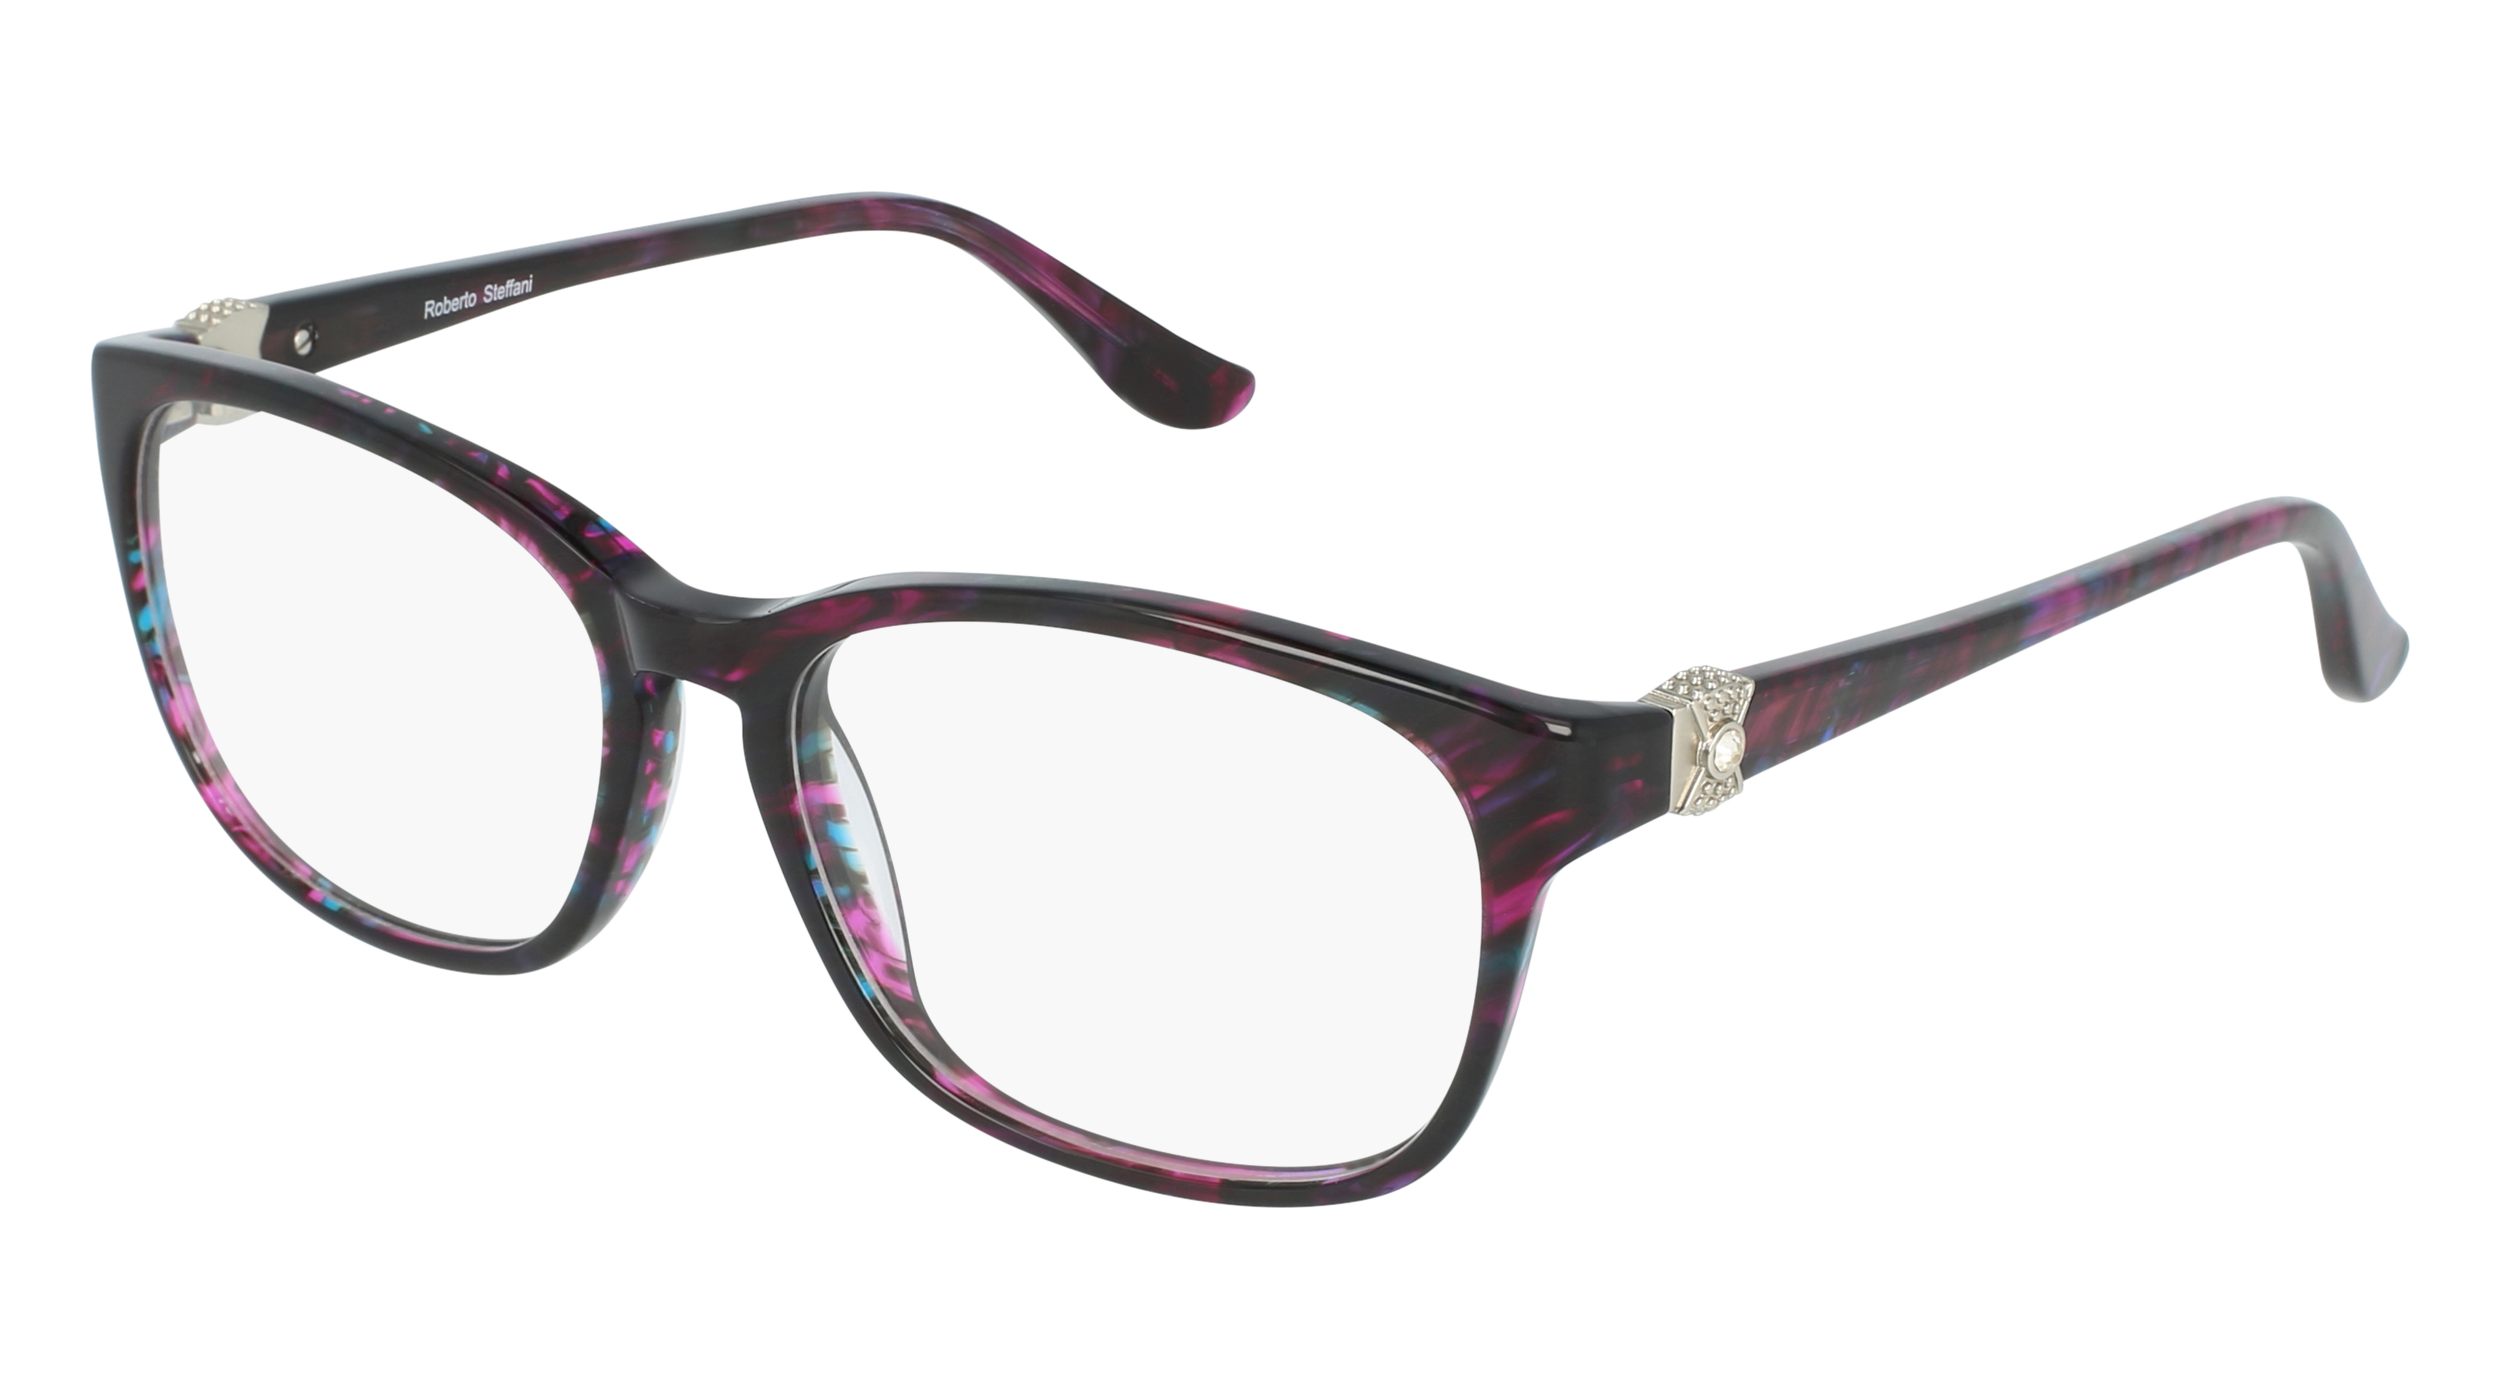 R RS 151 women's eyeglasses (from the side)